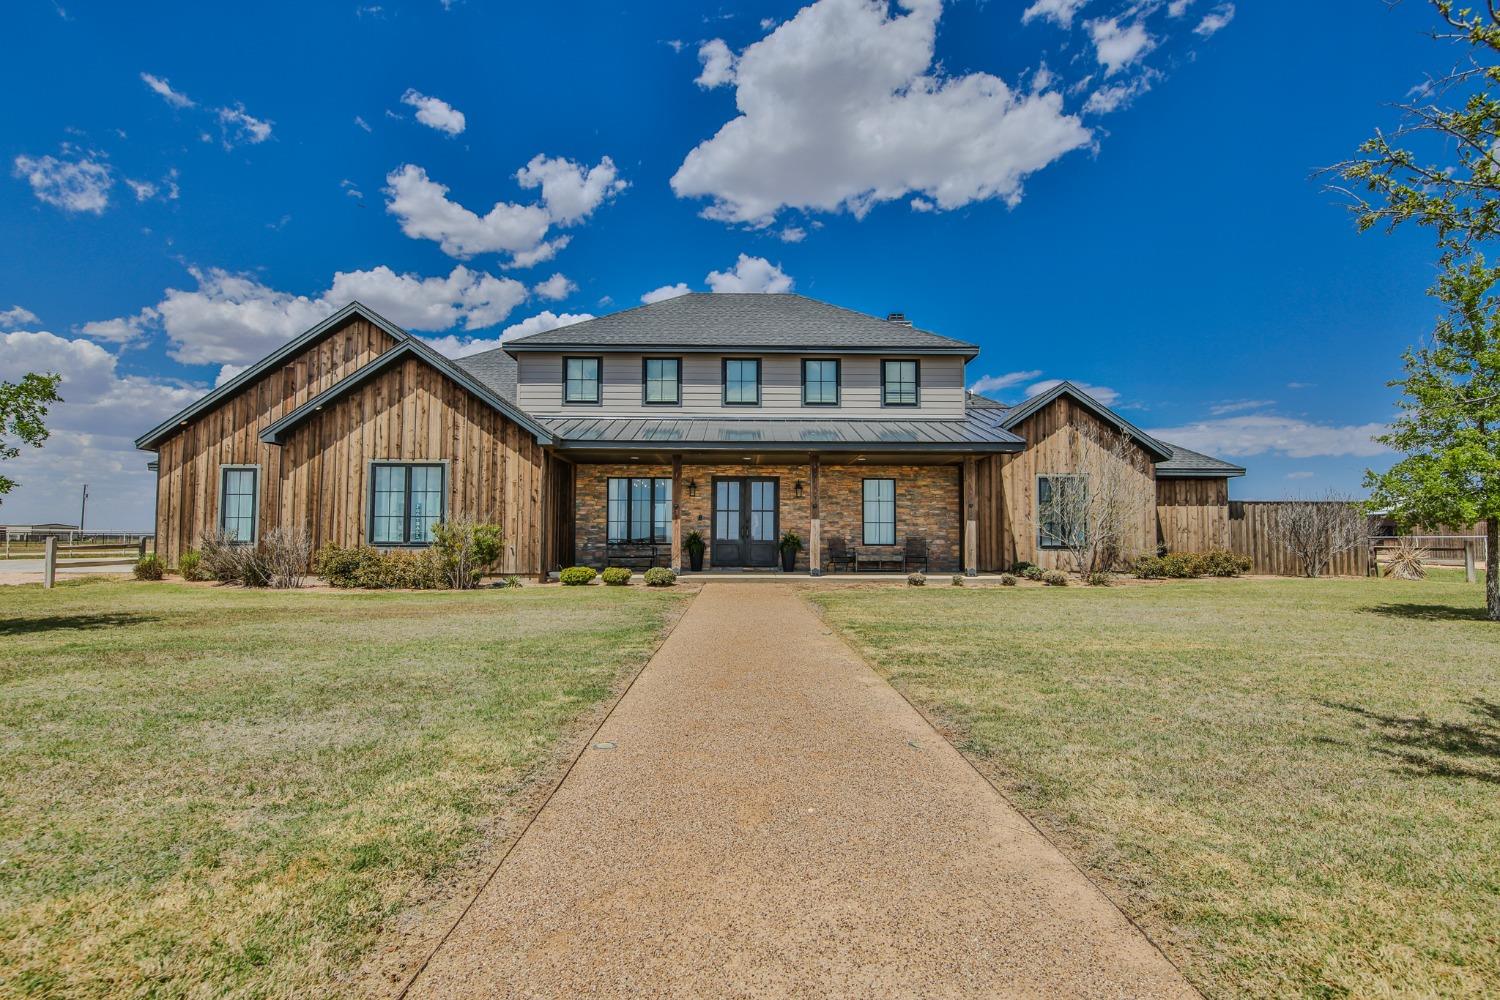 This Beautifully crafted custom home with a separate GUEST HOUSE sits on a 1-acre lot in New Home, TX and just 10 minutes from Lubbock! The main house, 3,226 square feet, consists of 3 large bedrooms, 3.5 bathrooms, a large bonus space/loft, a 23 foot vaulted ceiling in the living room, a separate office space, and an isolated master suite. The master suite offers separate vanities, a jetted tub, and a huge walk-in closet. The kitchen includes a gas stove, ice maker and built in double fridge along with a large pantry. In addition, the guest house has it's own separate entrances from the back porch and by it's own 1 car garage. It is 1,546 square feet, offers 2 bedrooms, 2 bathrooms, a full kitchen and a wheelchair accessible master suite. Enjoy the huge patio in the evenings shielded from the sunsets in the West. You'll find a dog run on the east side of the home as well. A rare find with a true guest house And/OR great mother in law suite. This house is like buying two homes in one!